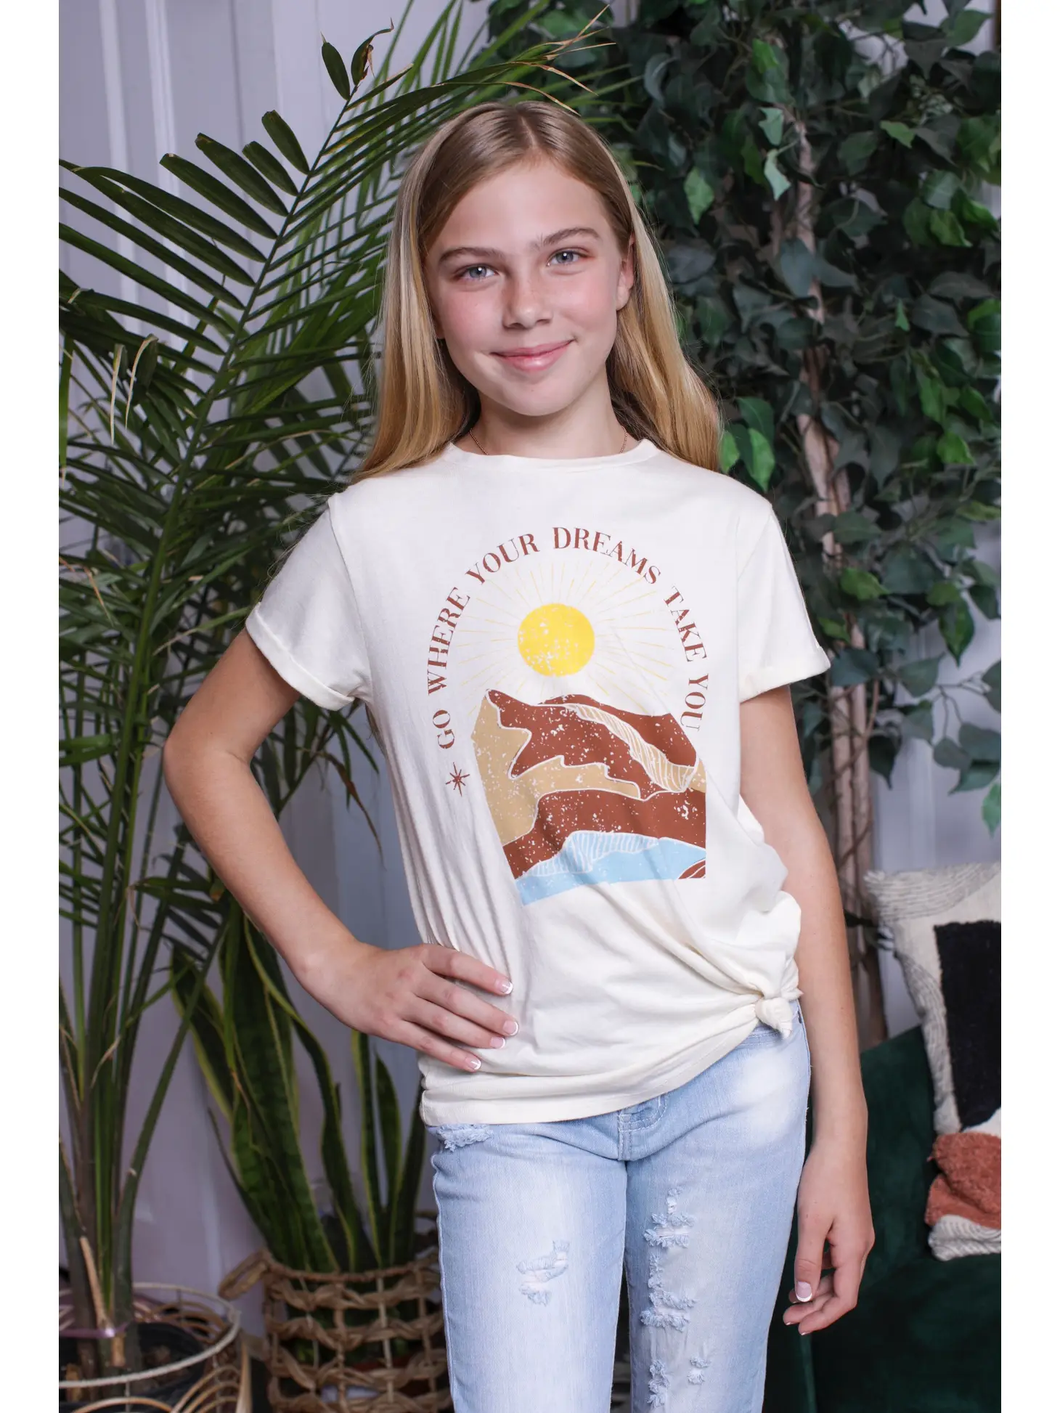 Go Where your dreams take you landscape tween graphic tee - TWEEN GIRLS